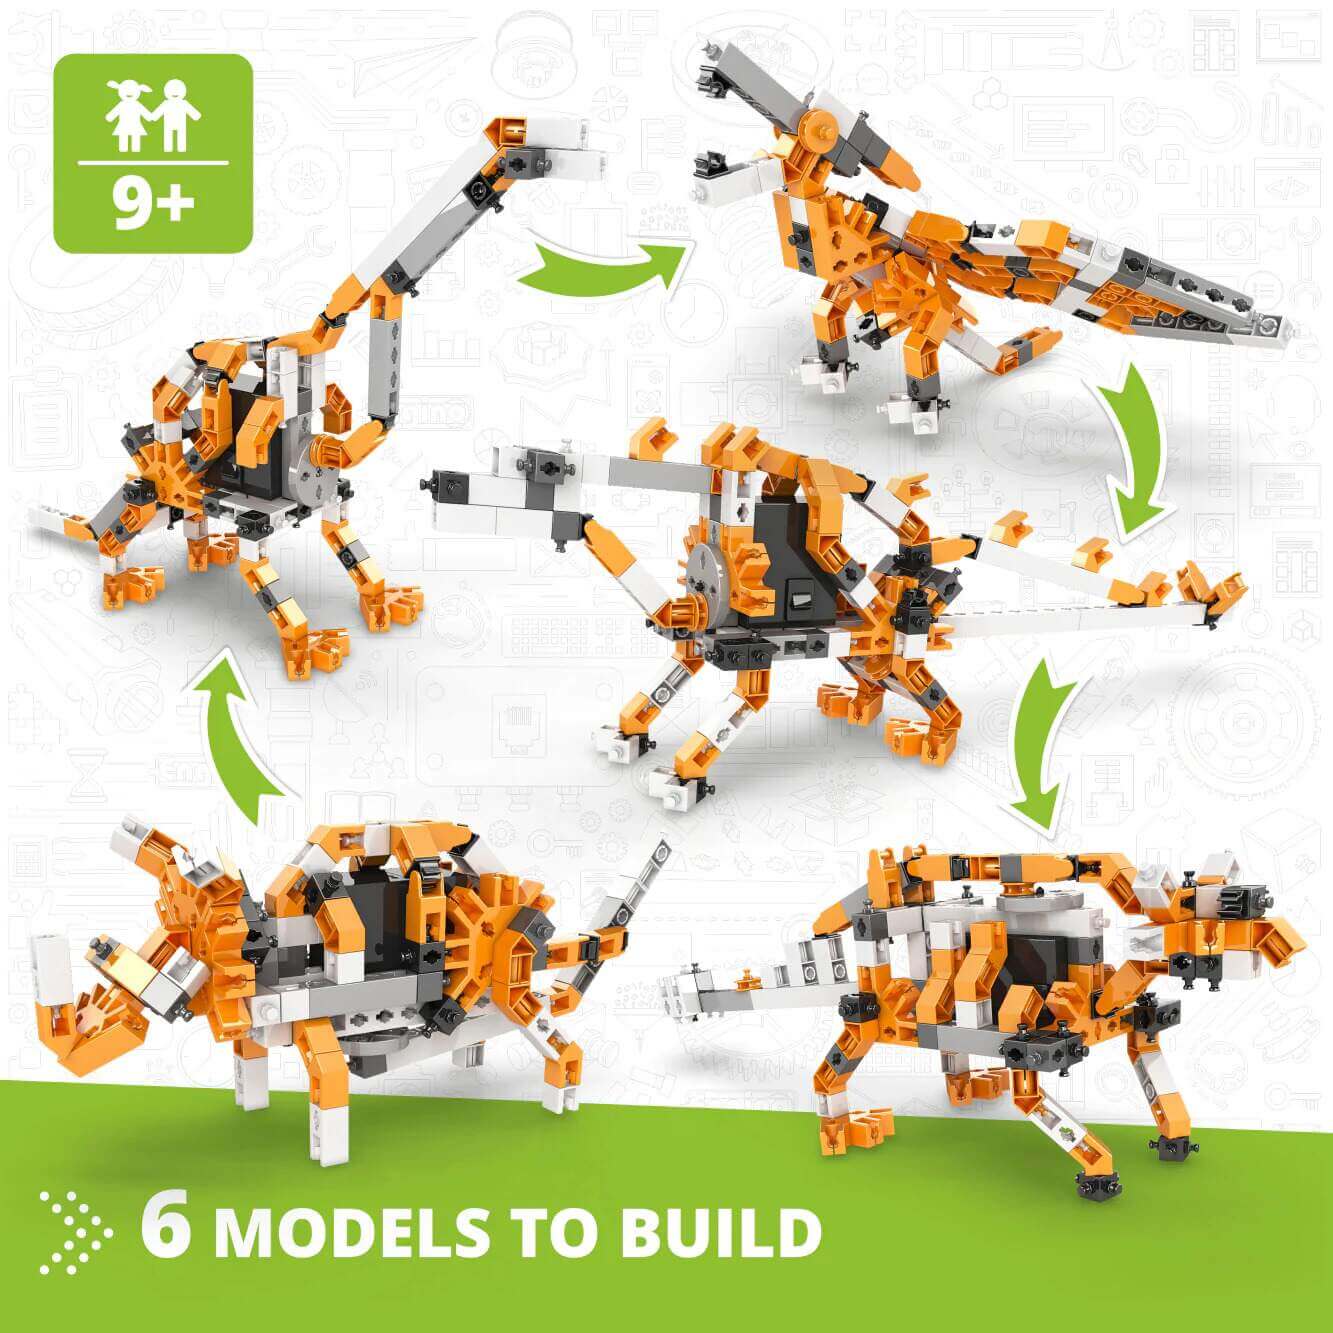 Stem kits from Engino - Engineering toys for children - Building sets for children